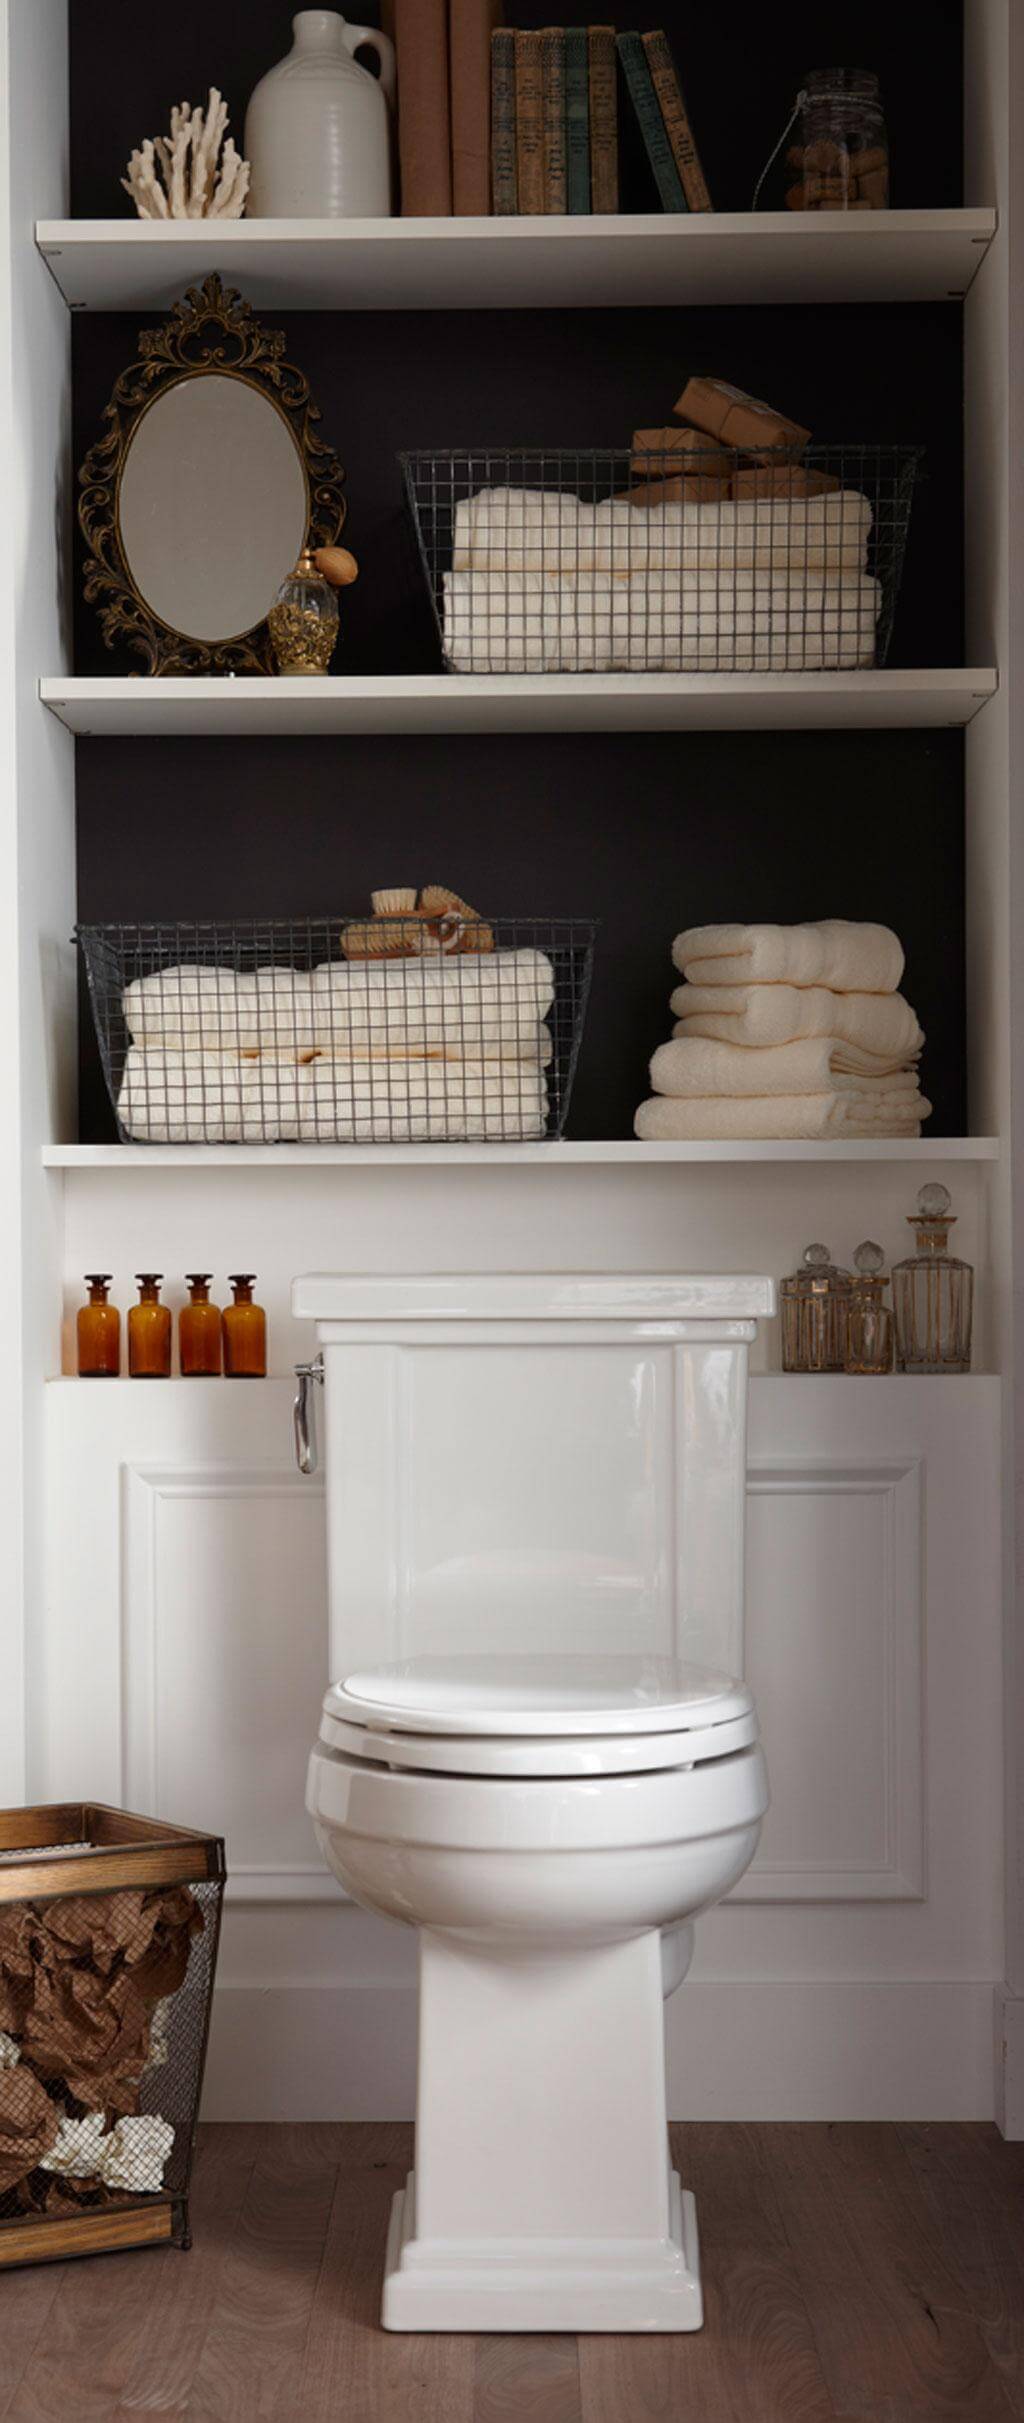 Over-the-toilet Storage Shelves with Molding Accent